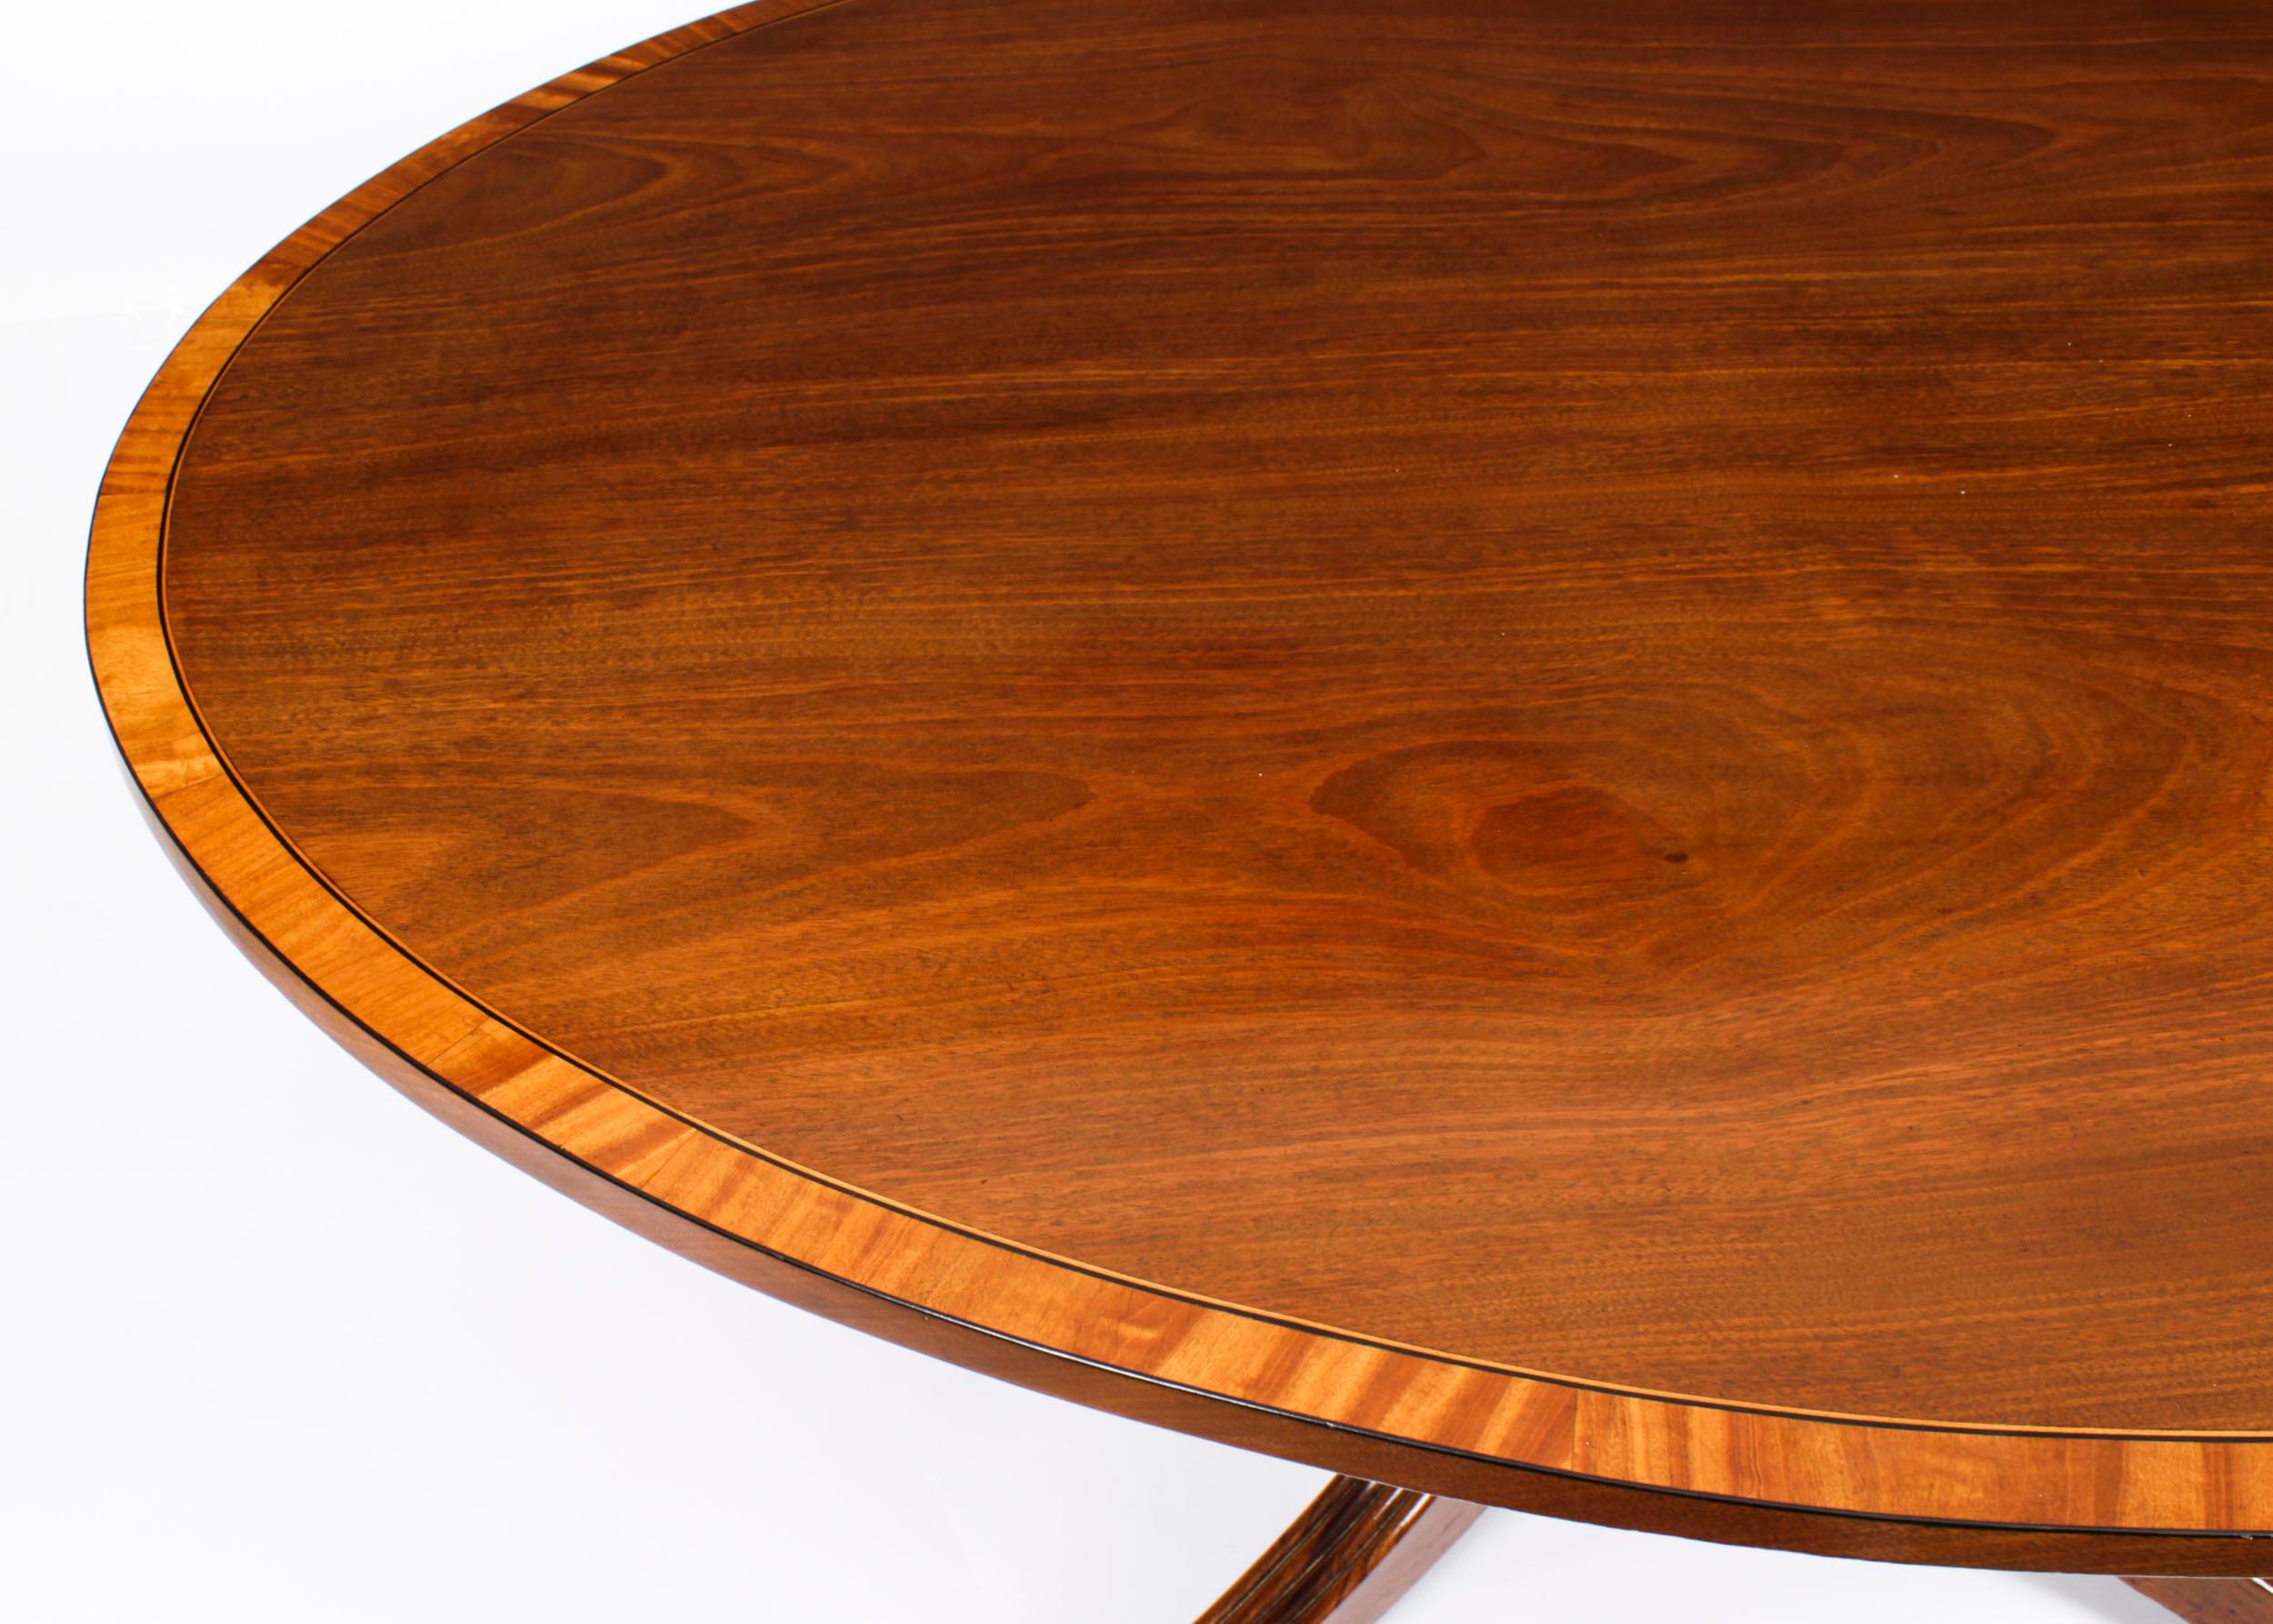 English Antique Oval Regency Flame Mahogany Dining Table 19th C For Sale